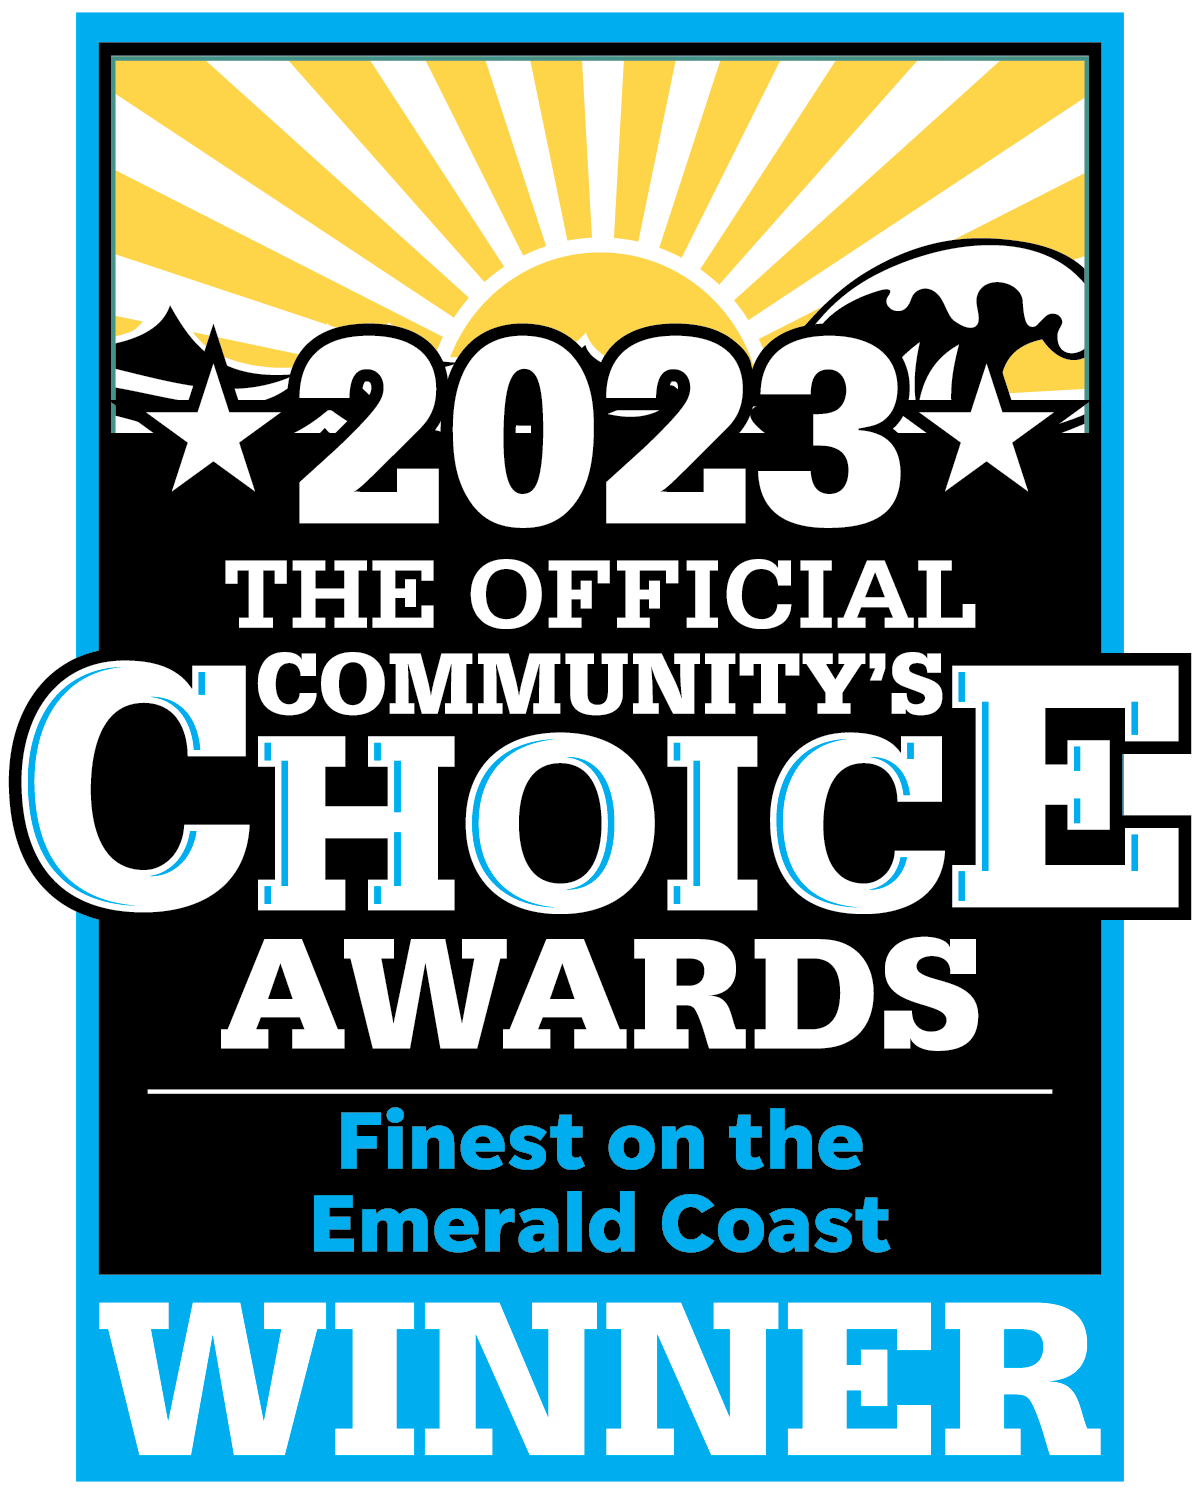 2023 The Official Community's Choice Awards Finest on the Emerald Coast WINNER